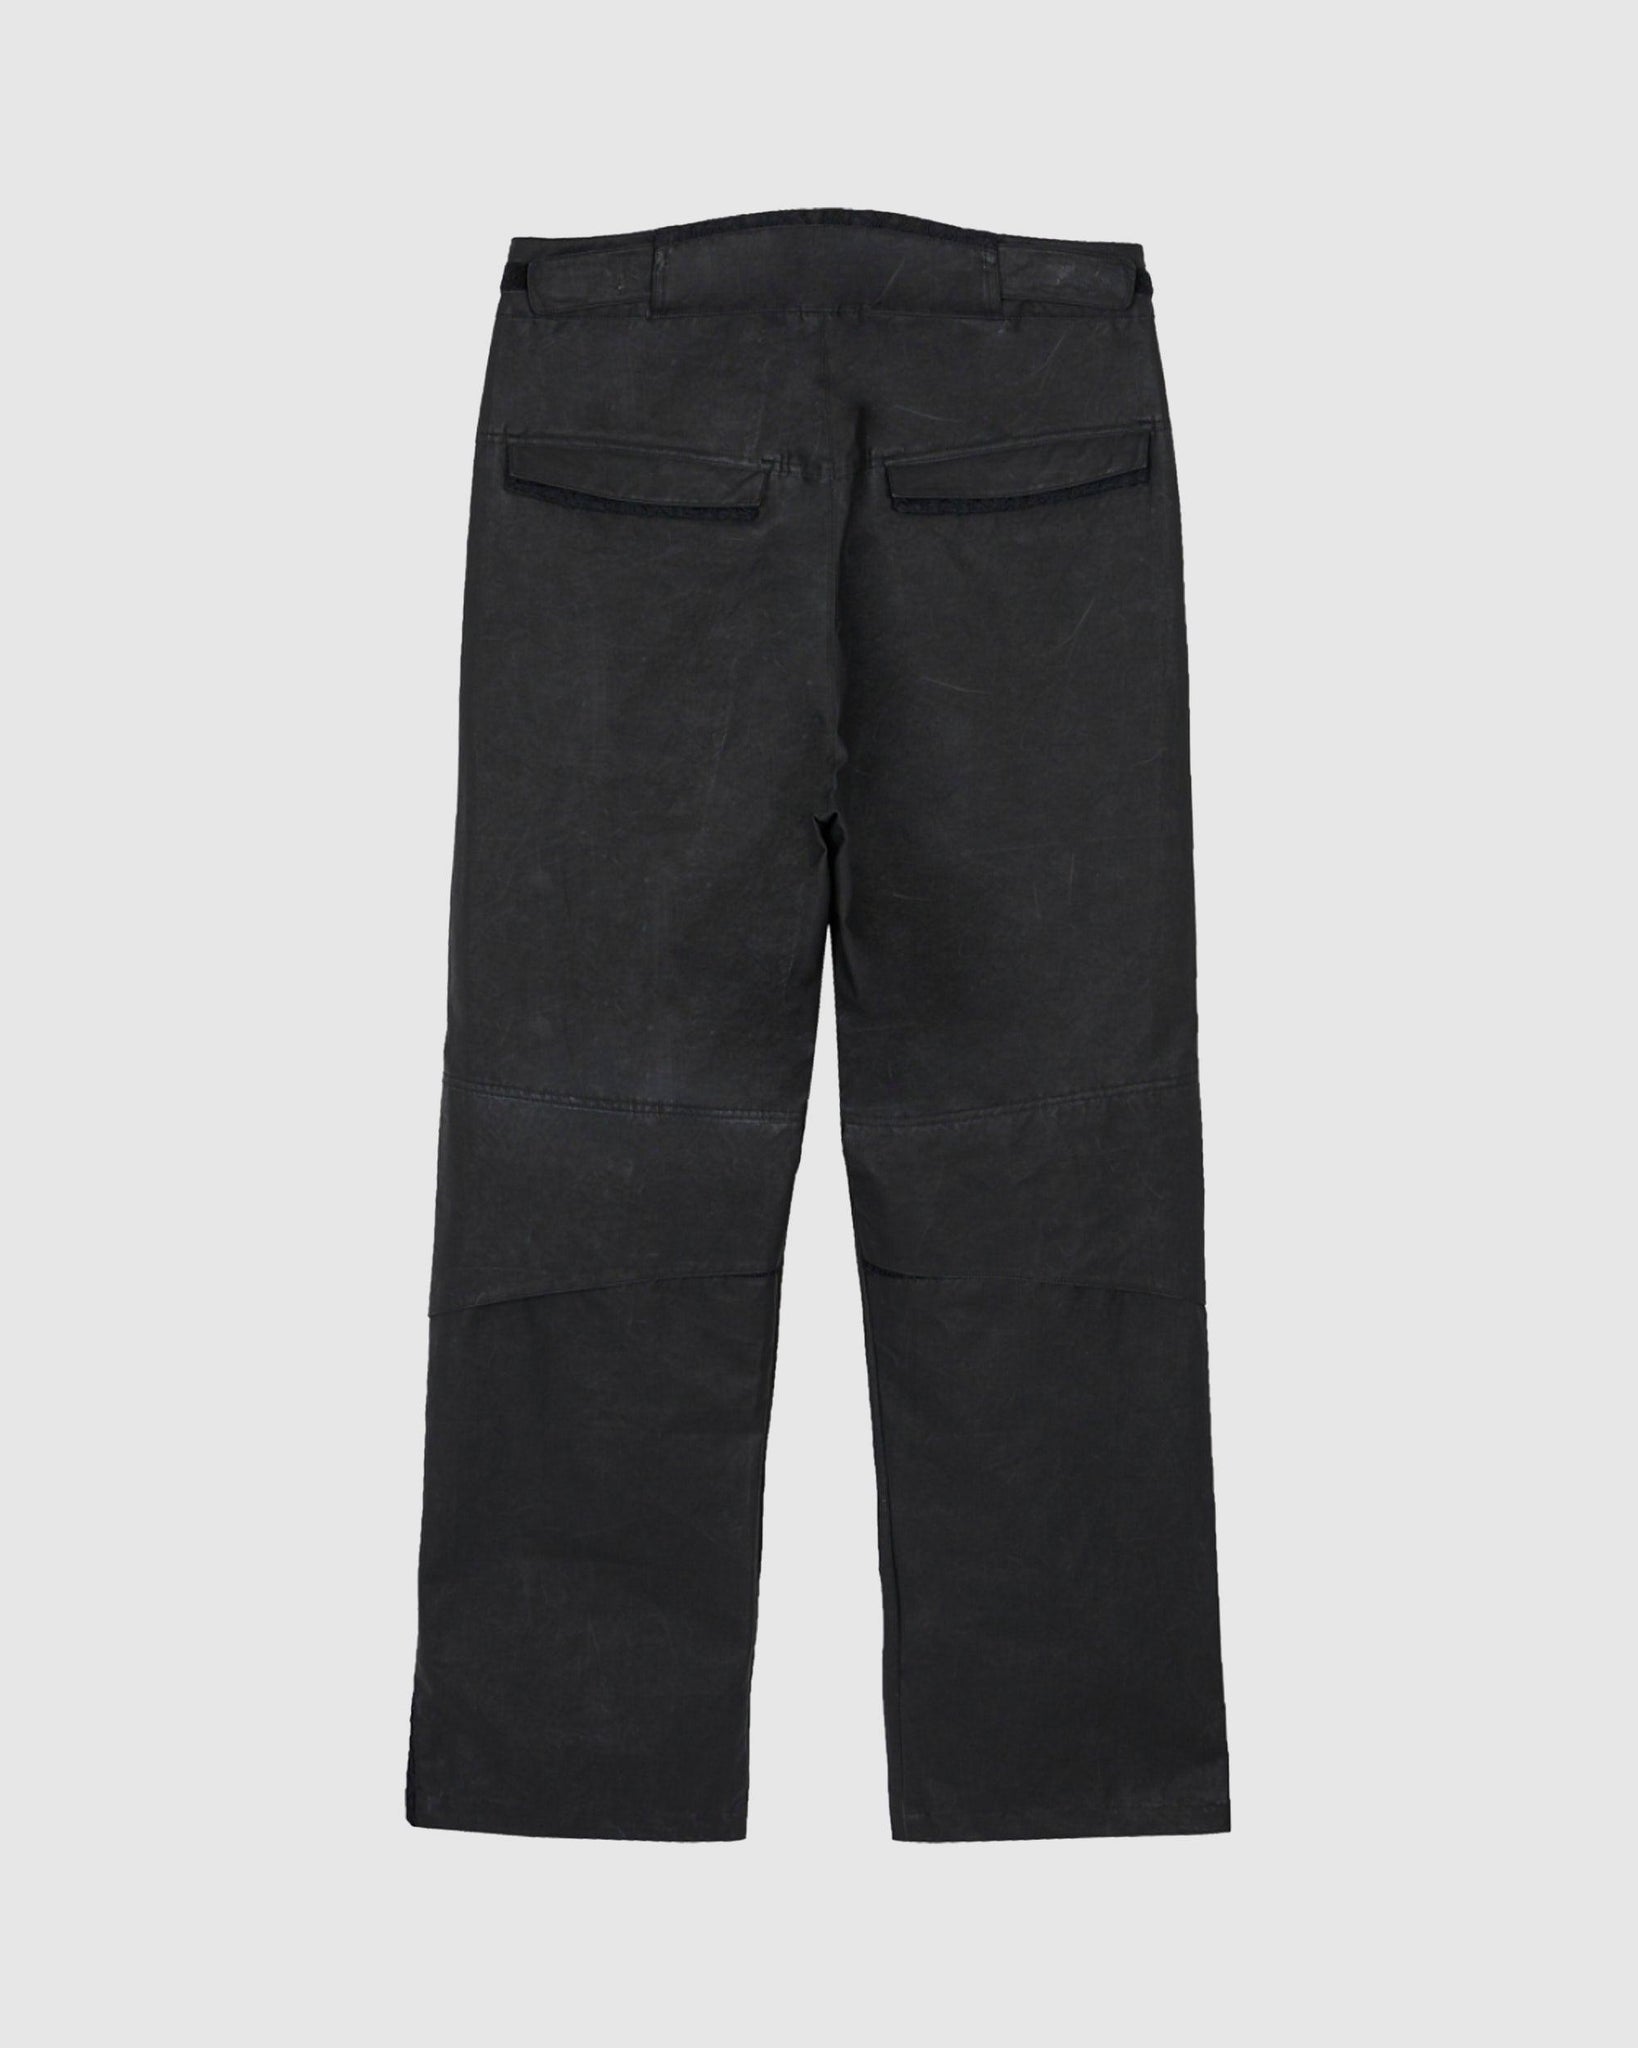 XLIM Black EP.3 01 Trousers – Chinatown Country Club